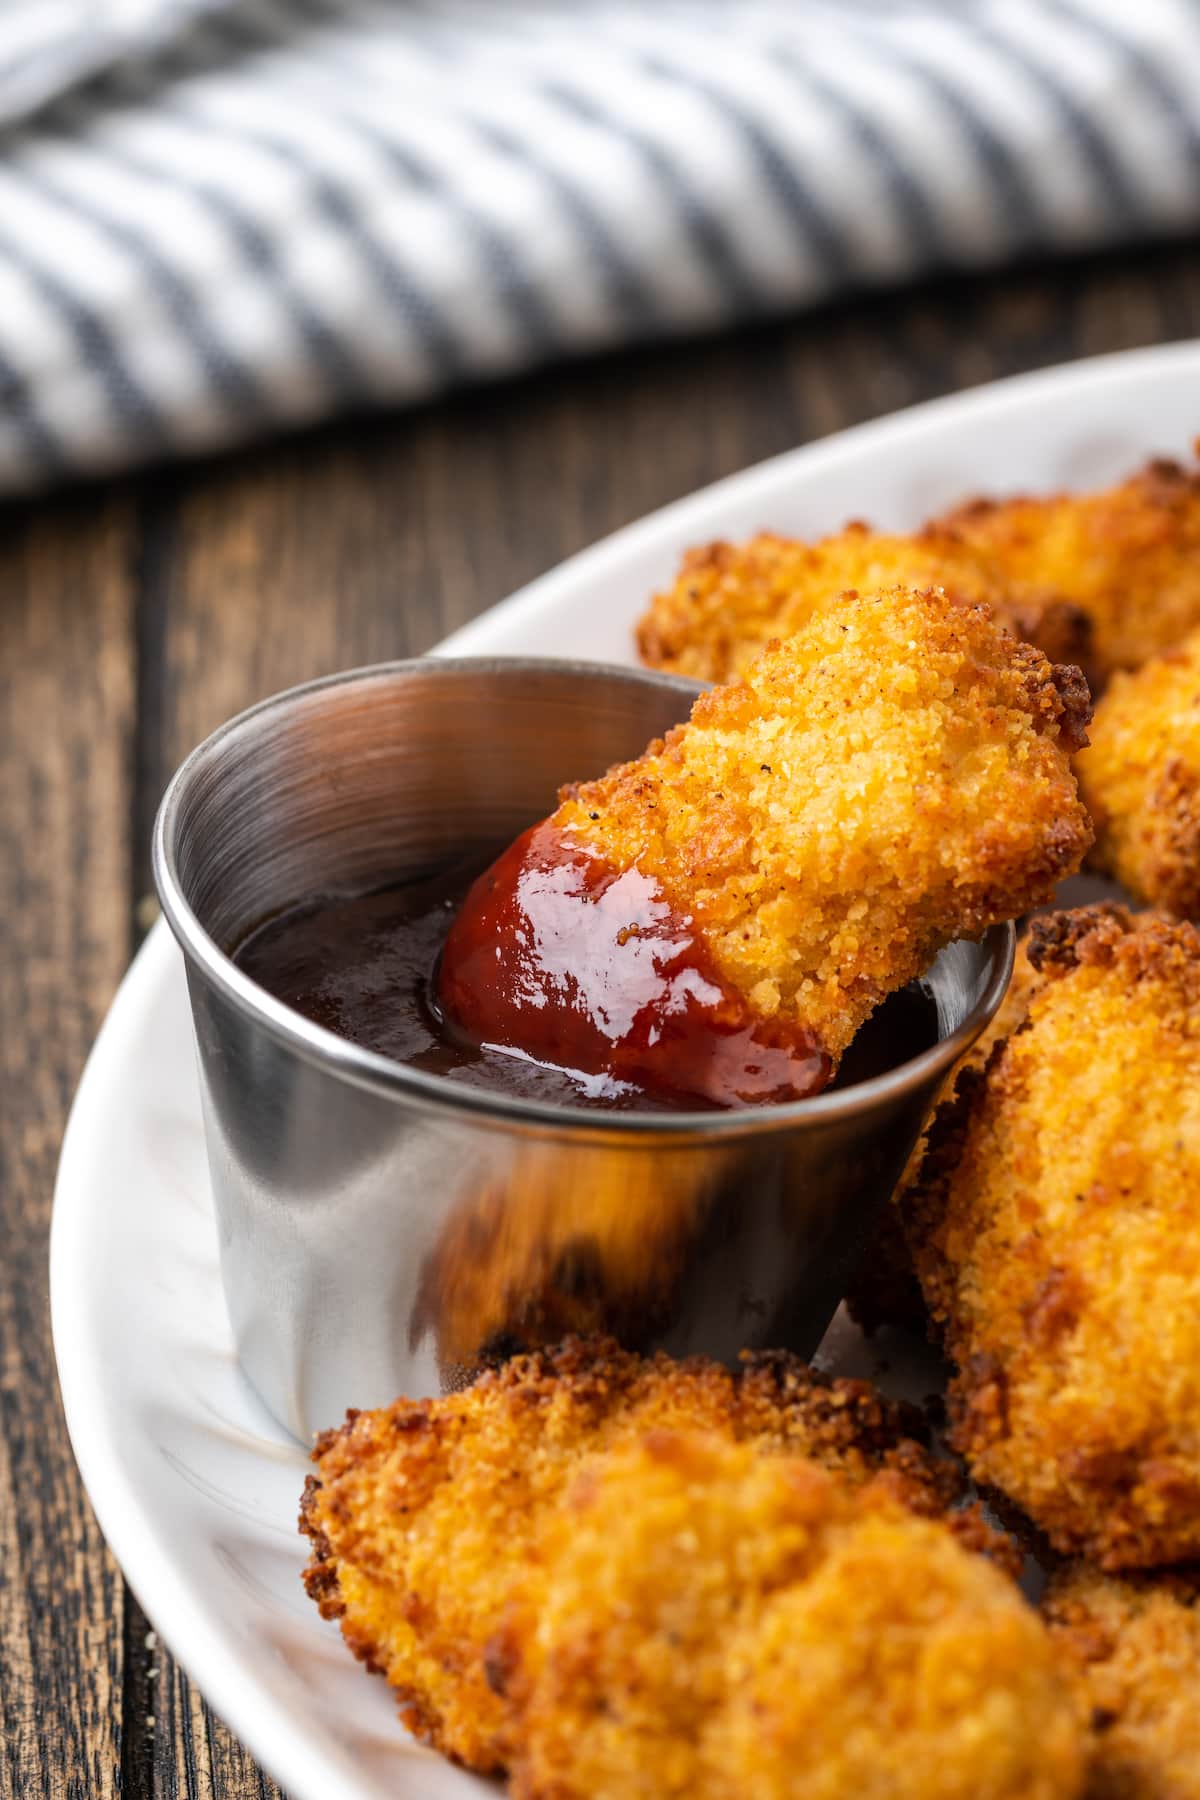 A piece of popcorn chicken partially dipped into a ramekin of BBQ sauce, on a plate with more popcorn chicken pieces.